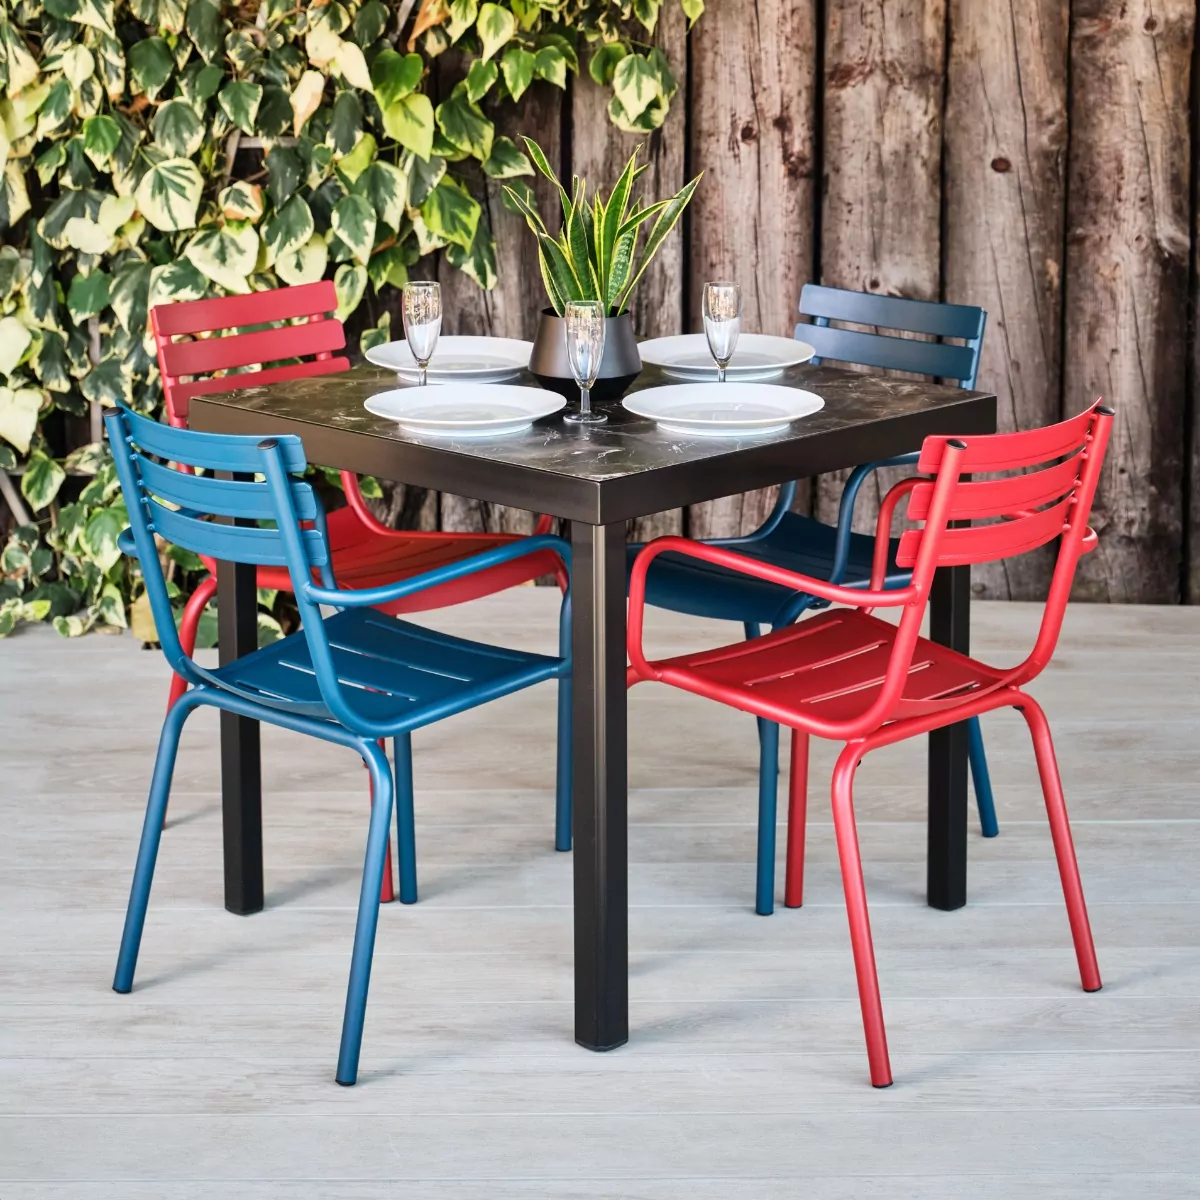 Indoor & Outdoor Furniture Stackable Armchairs in Red & Blue Hamsterley Range with Epping Marble Effect Square Table